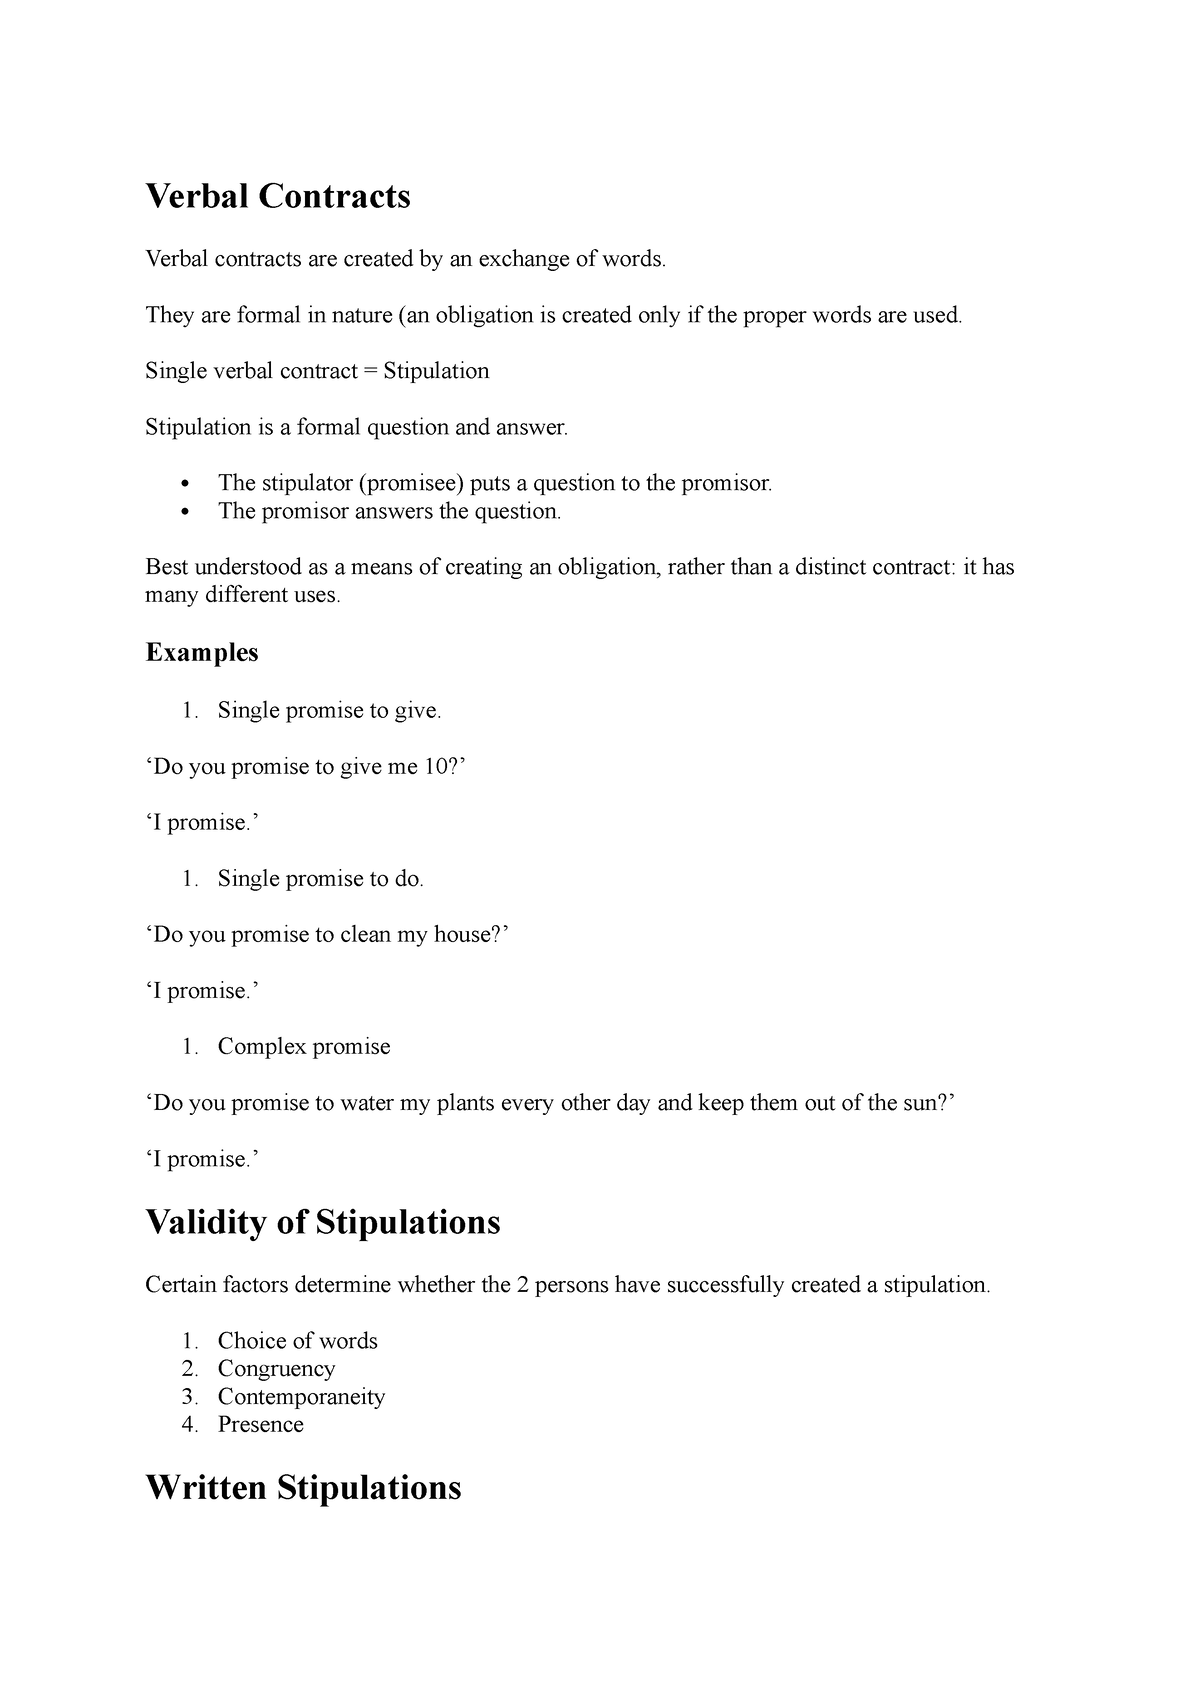 Lecture 6 Verbal Contracts Verbal Contracts Verbal contracts are